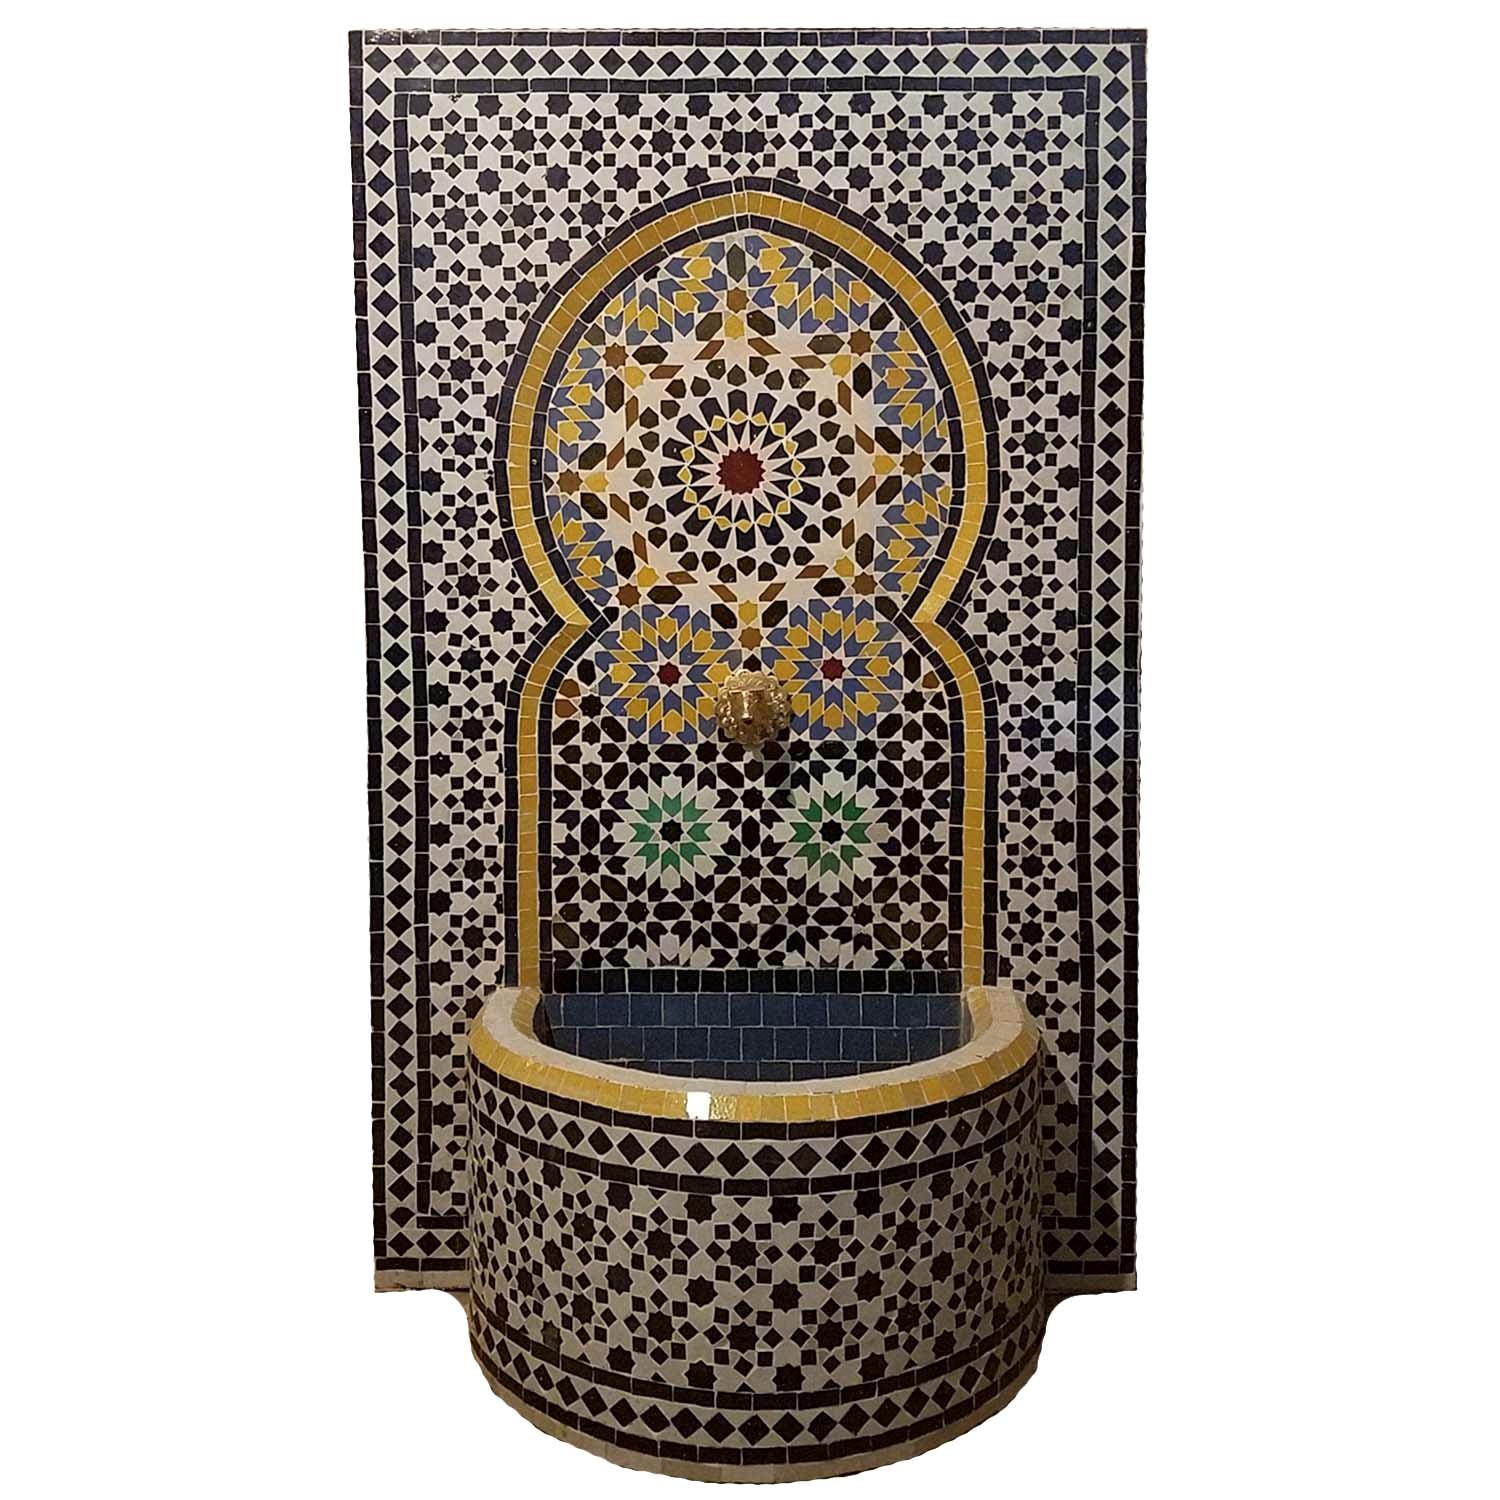 Meknes Moroccan Mosaic Fountain, All Mosaics For Sale